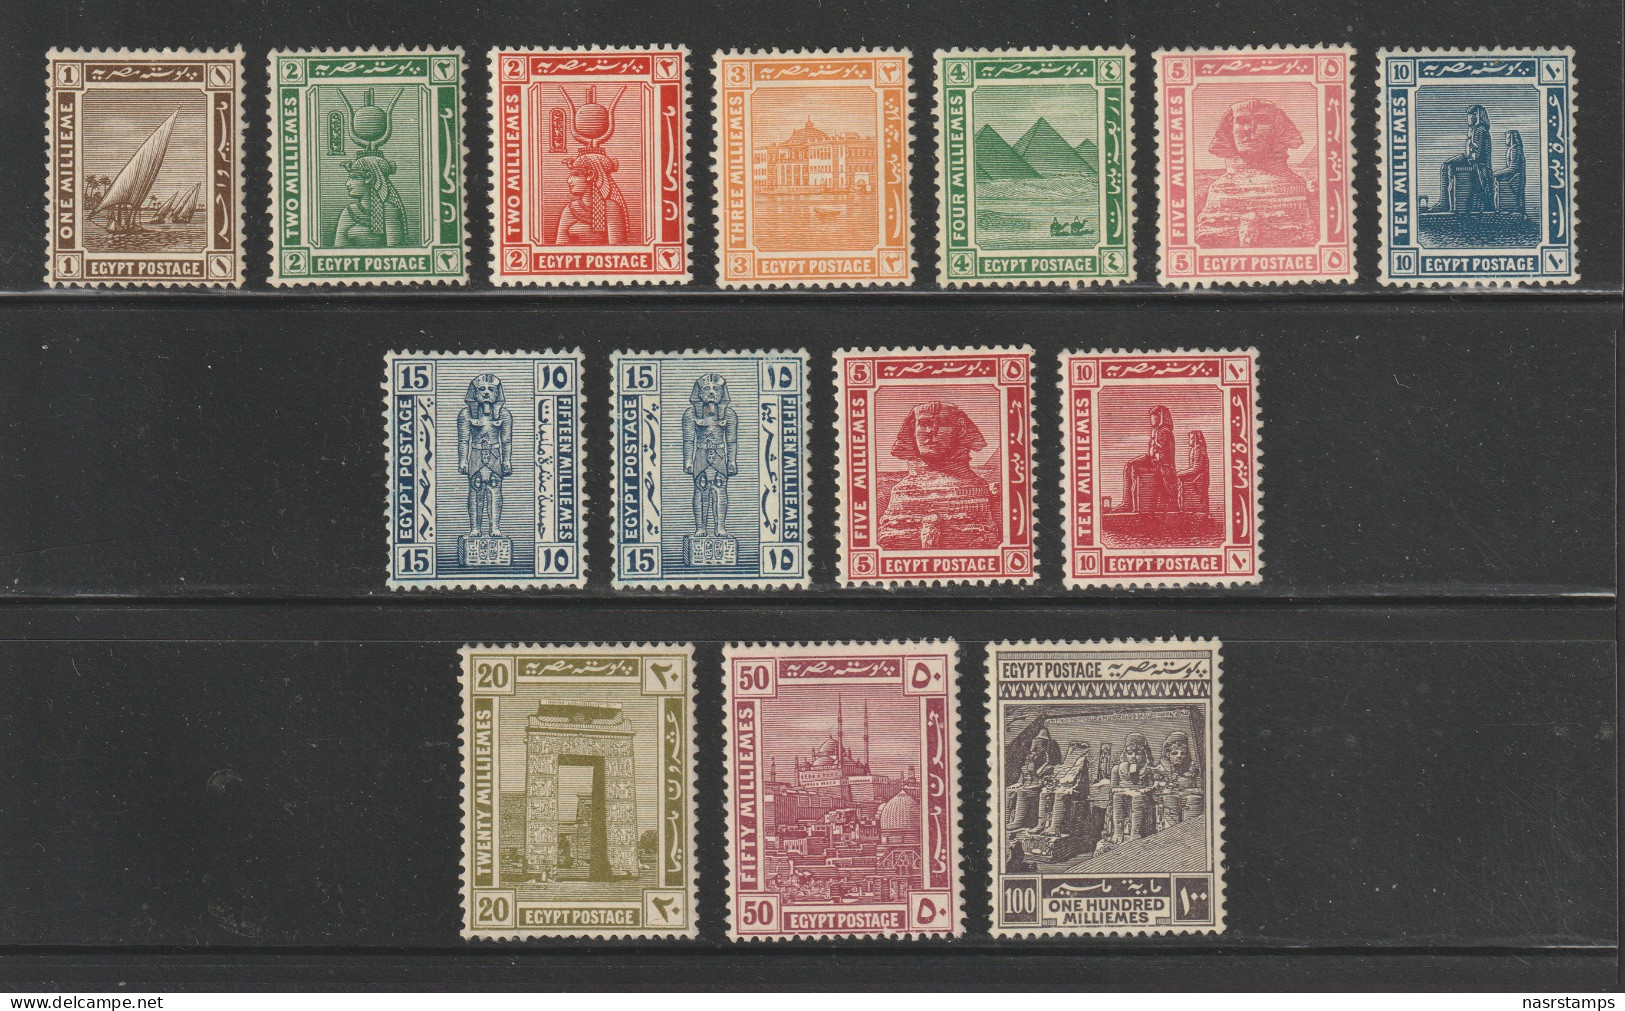 Egypt - 1921 - Rare - ( The Second Pictorial Issue ) - Complete Set - MNH** - 1915-1921 British Protectorate